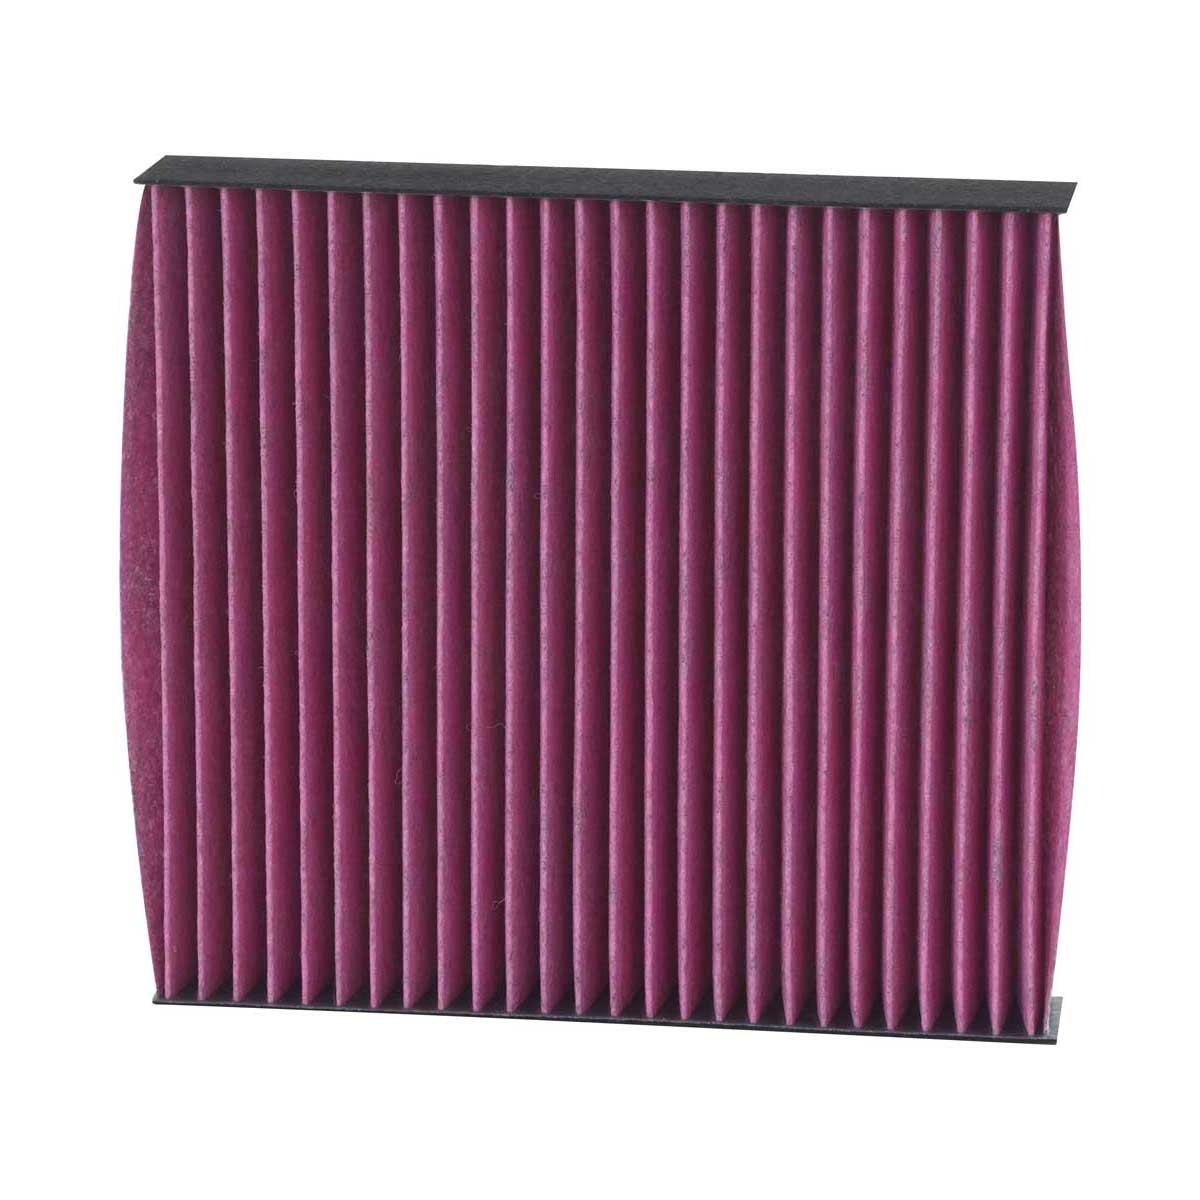 Nissan Skyline Coupe Air conditioning parts - Pollen filter K&N Filters DVF5050